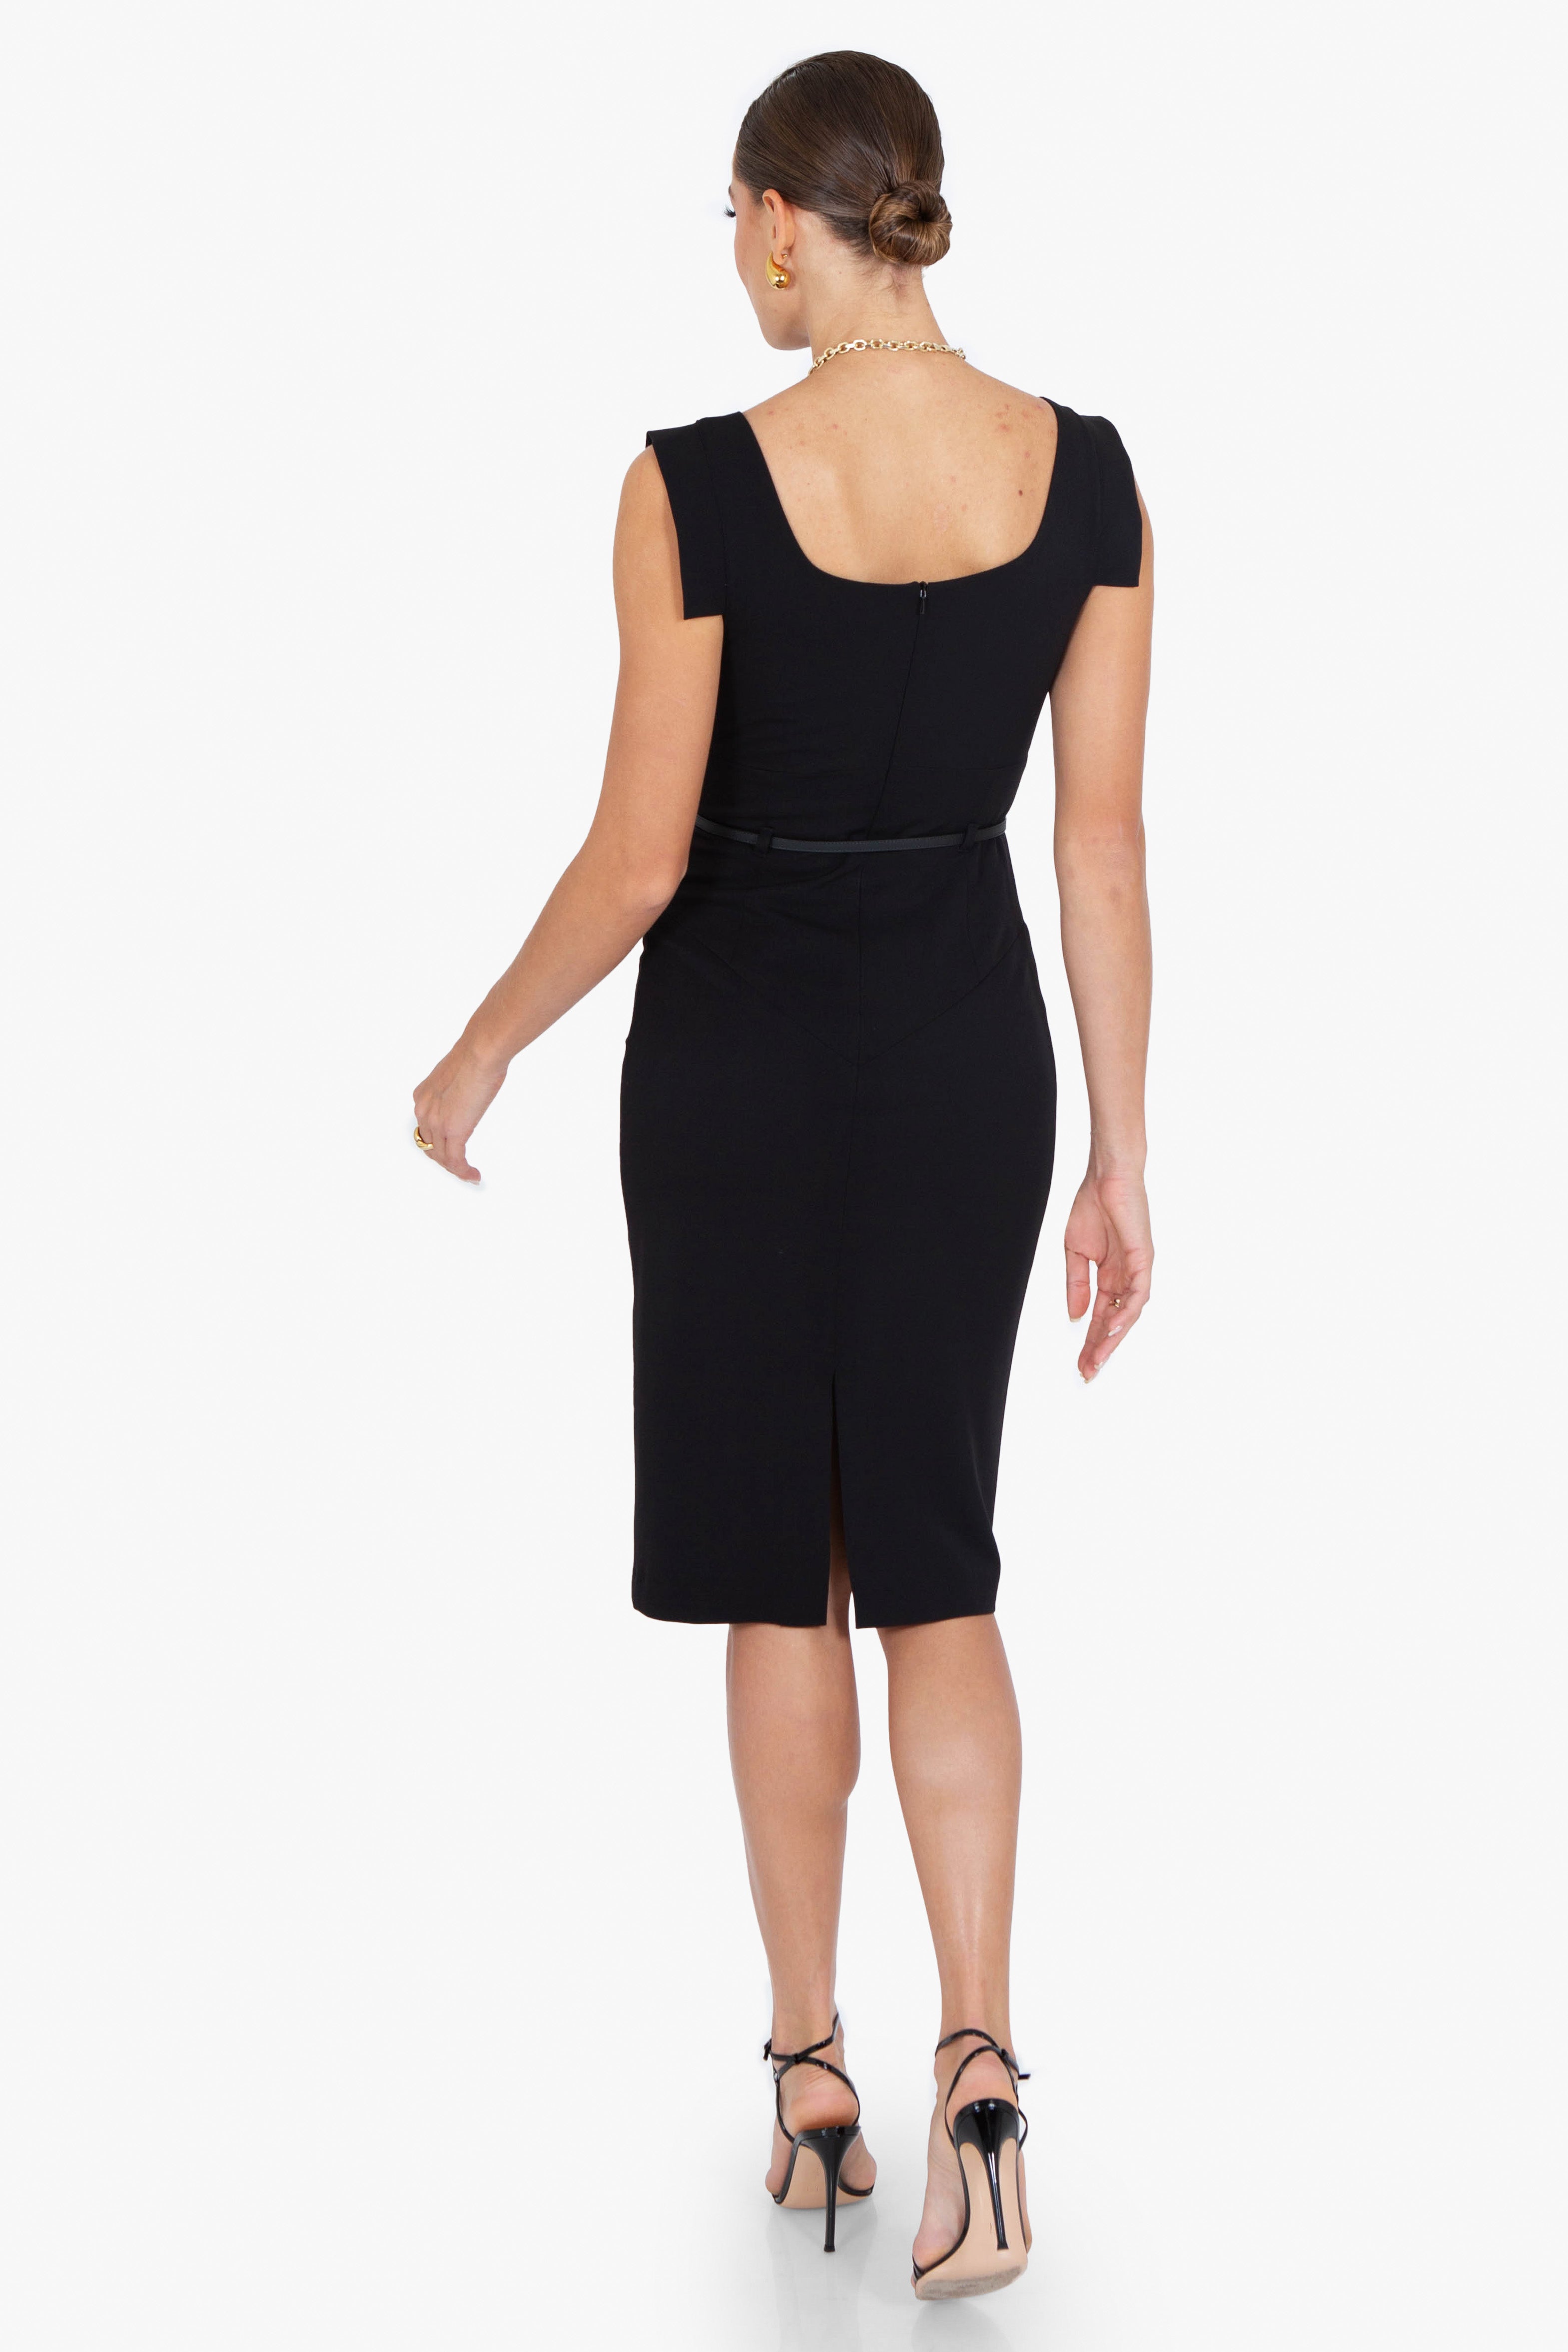 Women's Black Dresses | French Connection US